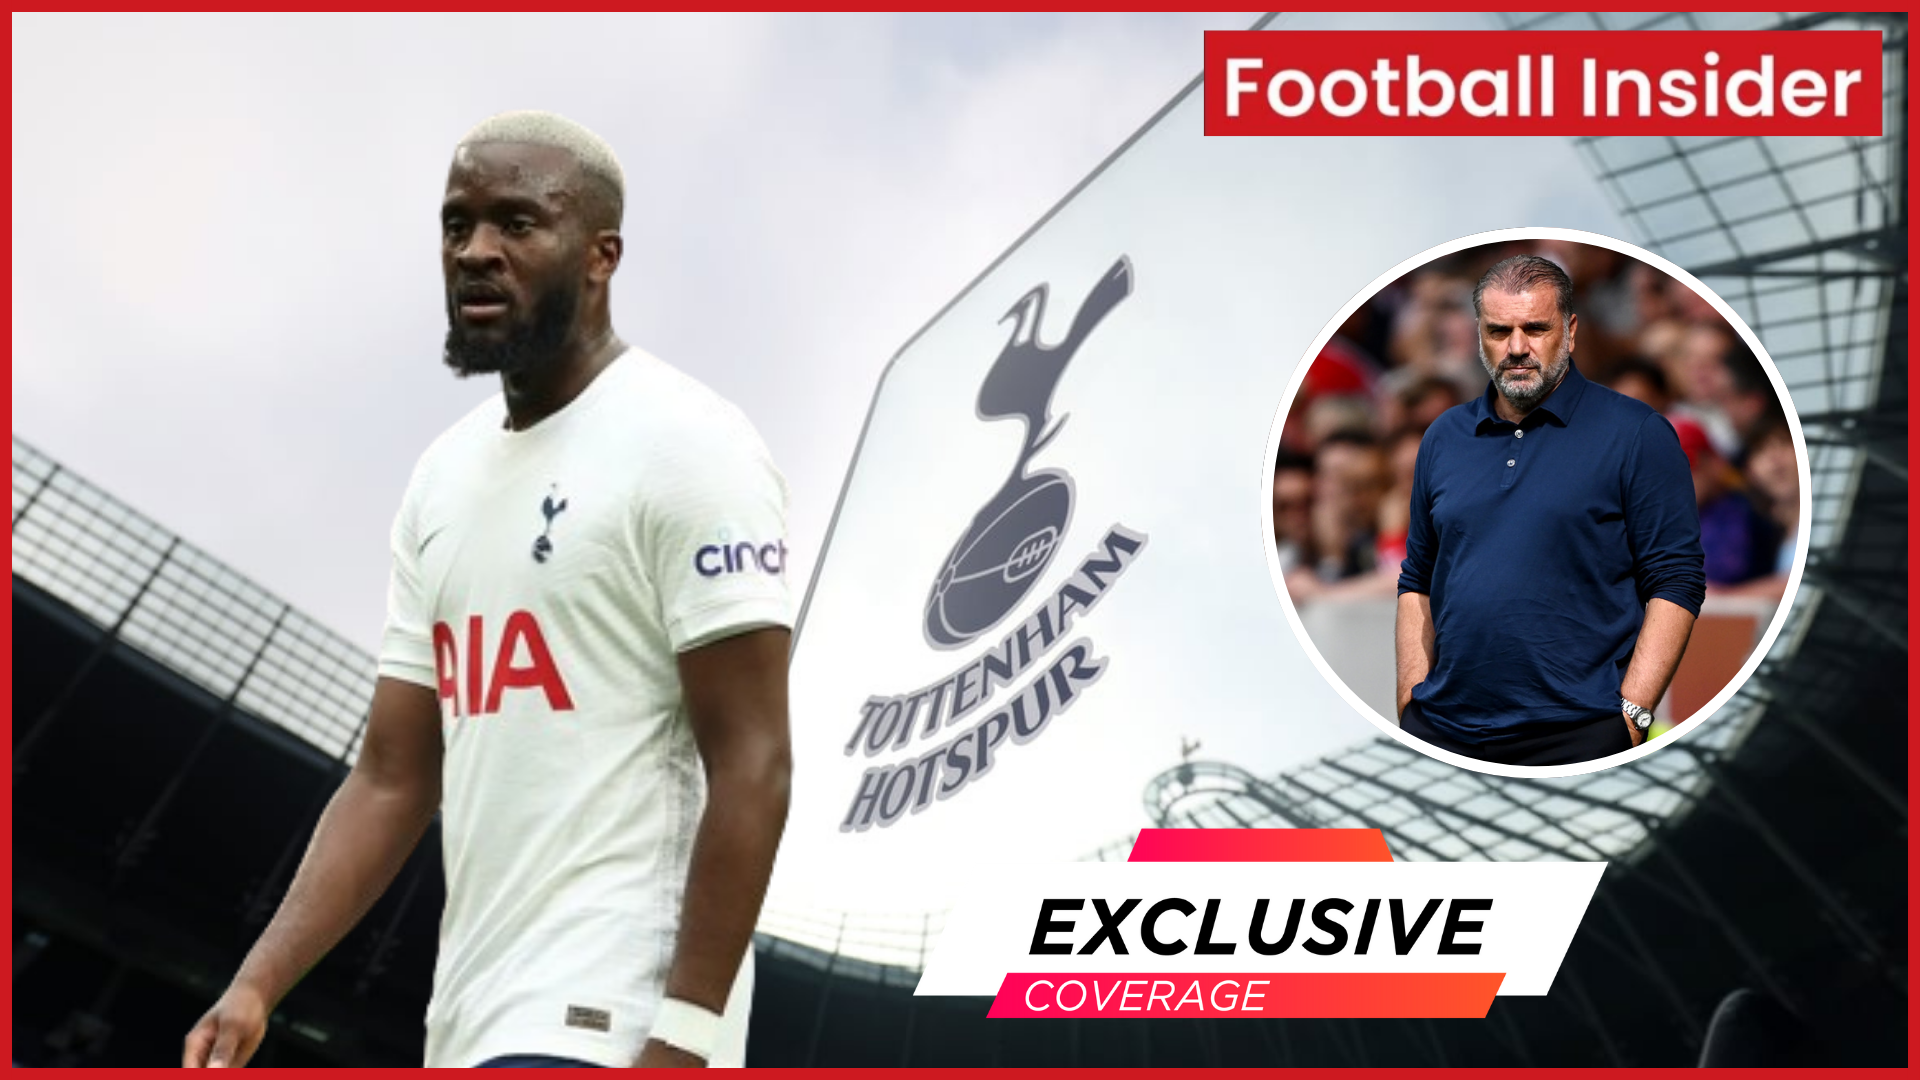 Tottenham plan to accept Ndombele offer as Galatasaray stance revealed